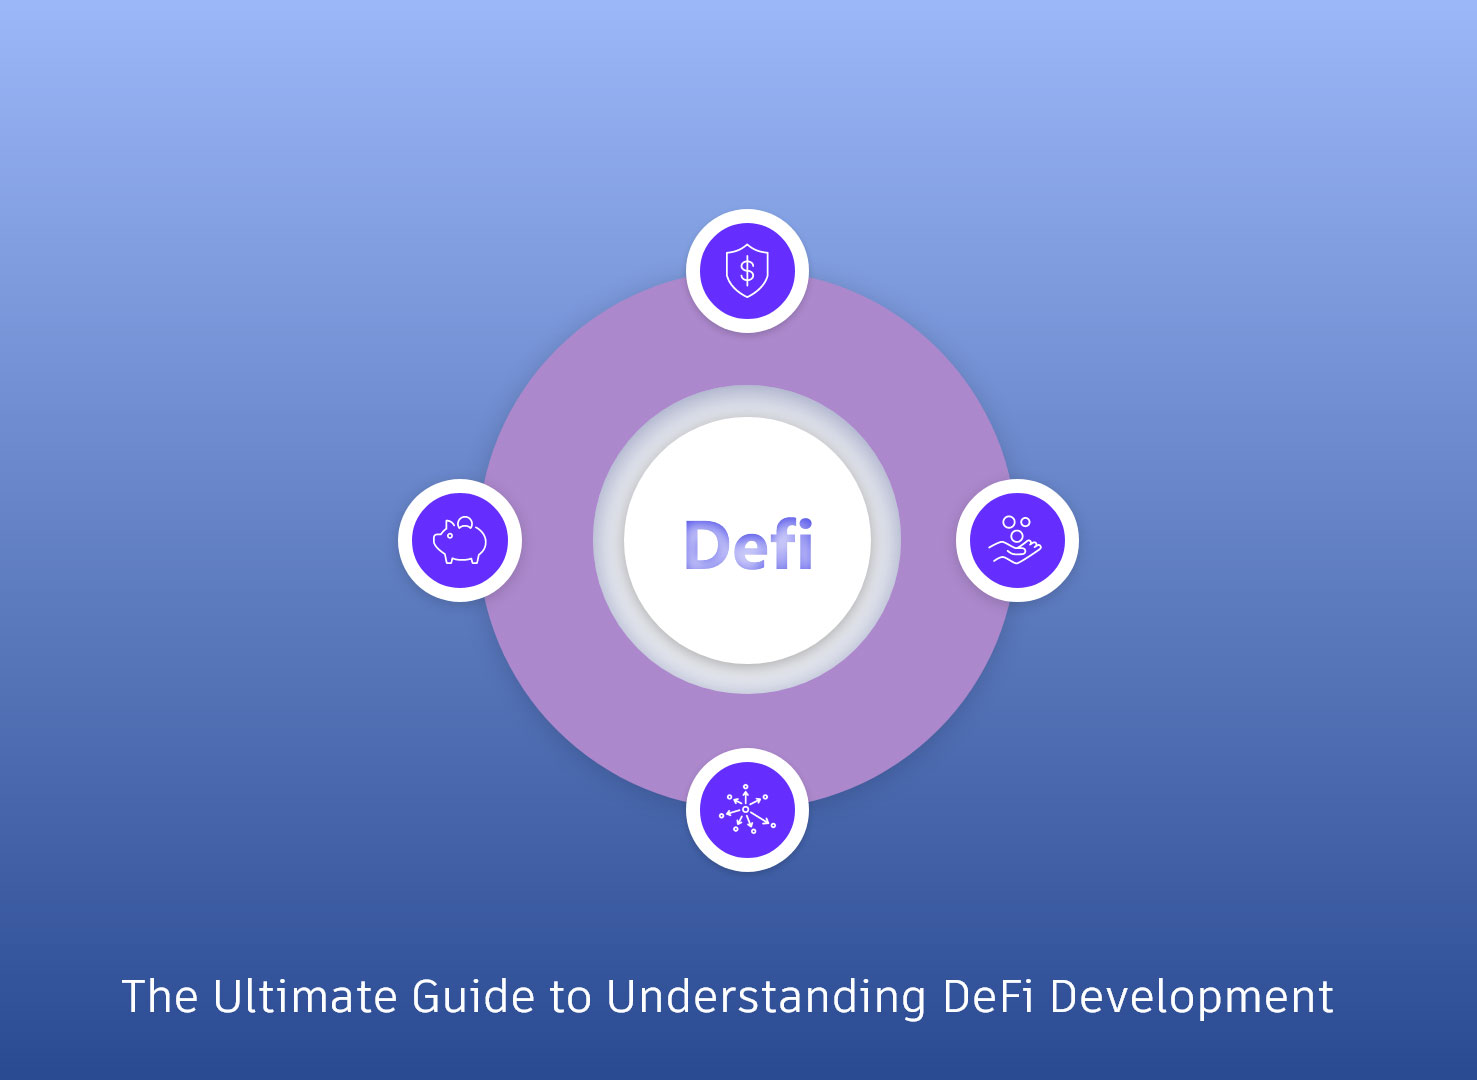 The Ultimate Guide to Understanding DeFi Development